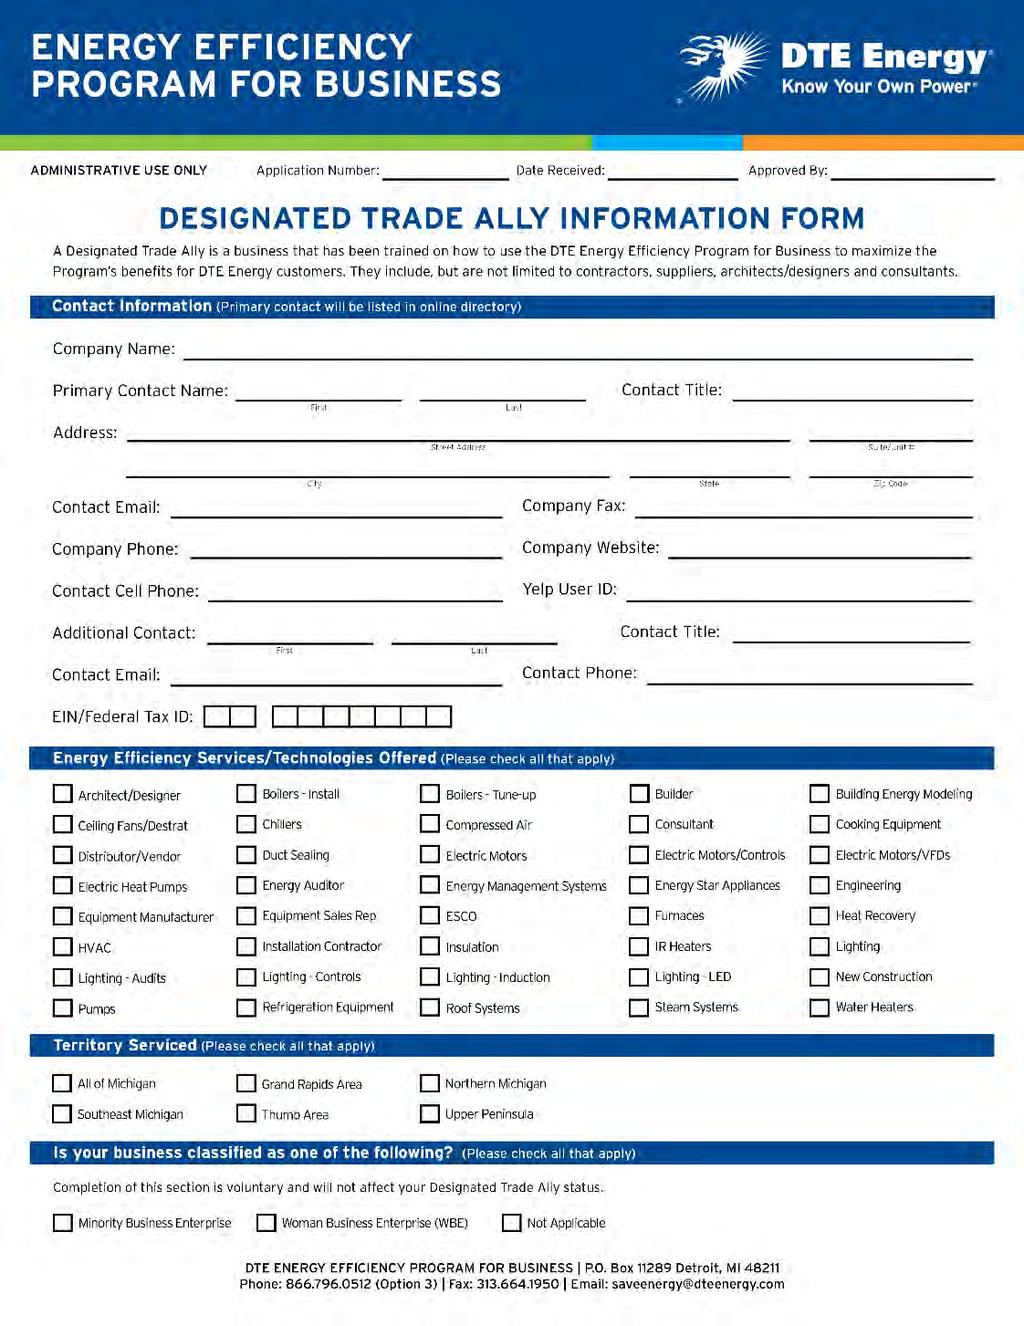 Complete and sign our form o Required to become a Designated Trade Ally